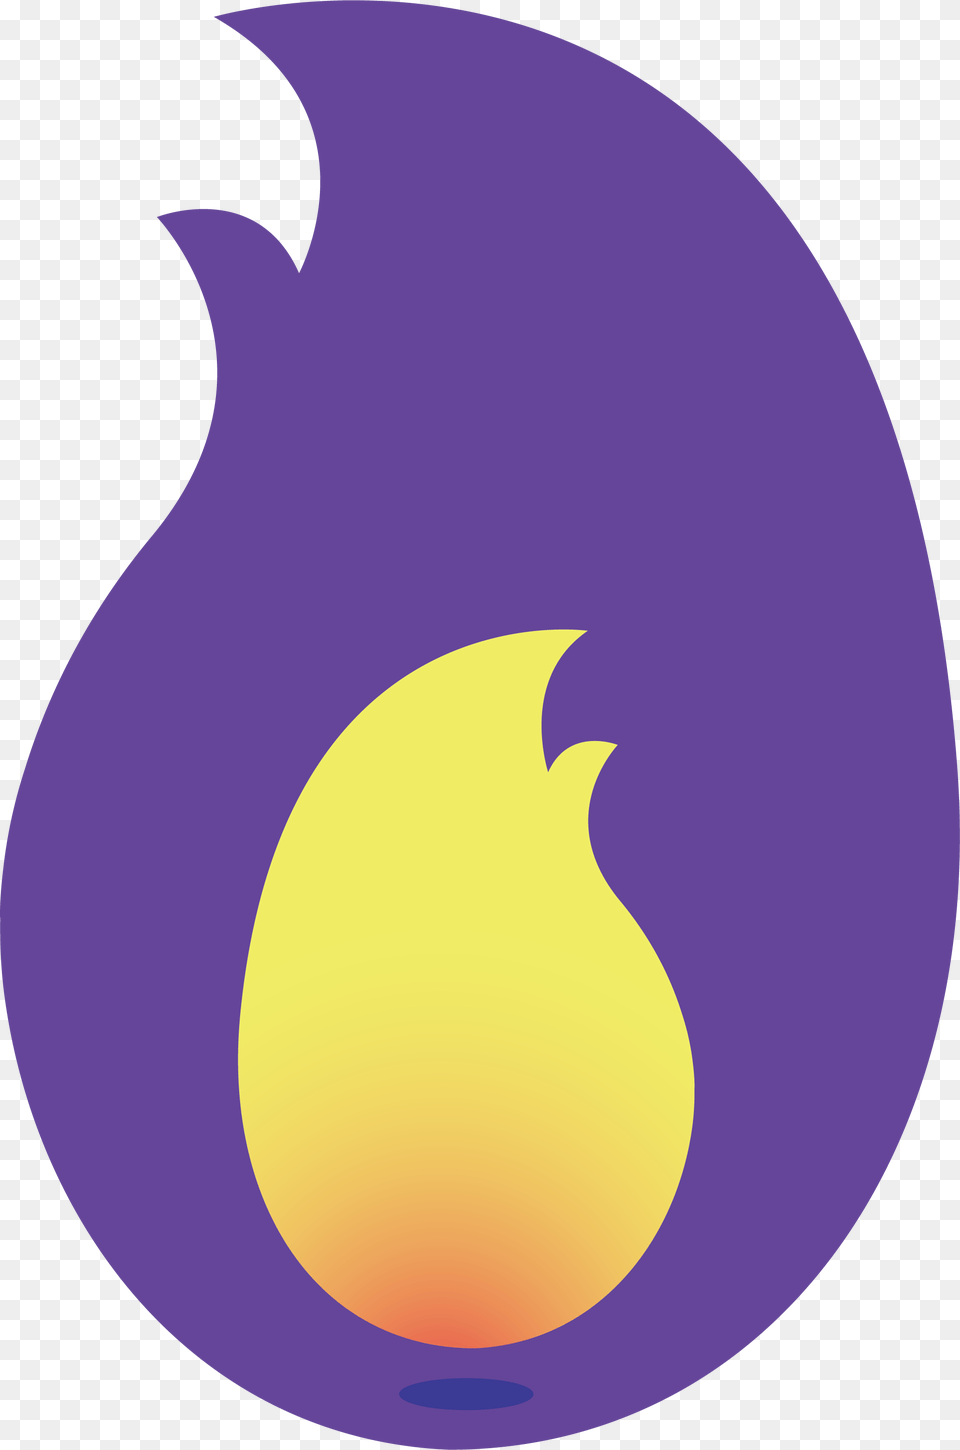 Blast Blast Blast My Explosion Purple Flame Yellow And Purple Flame, Logo, Astronomy, Moon, Nature Free Transparent Png